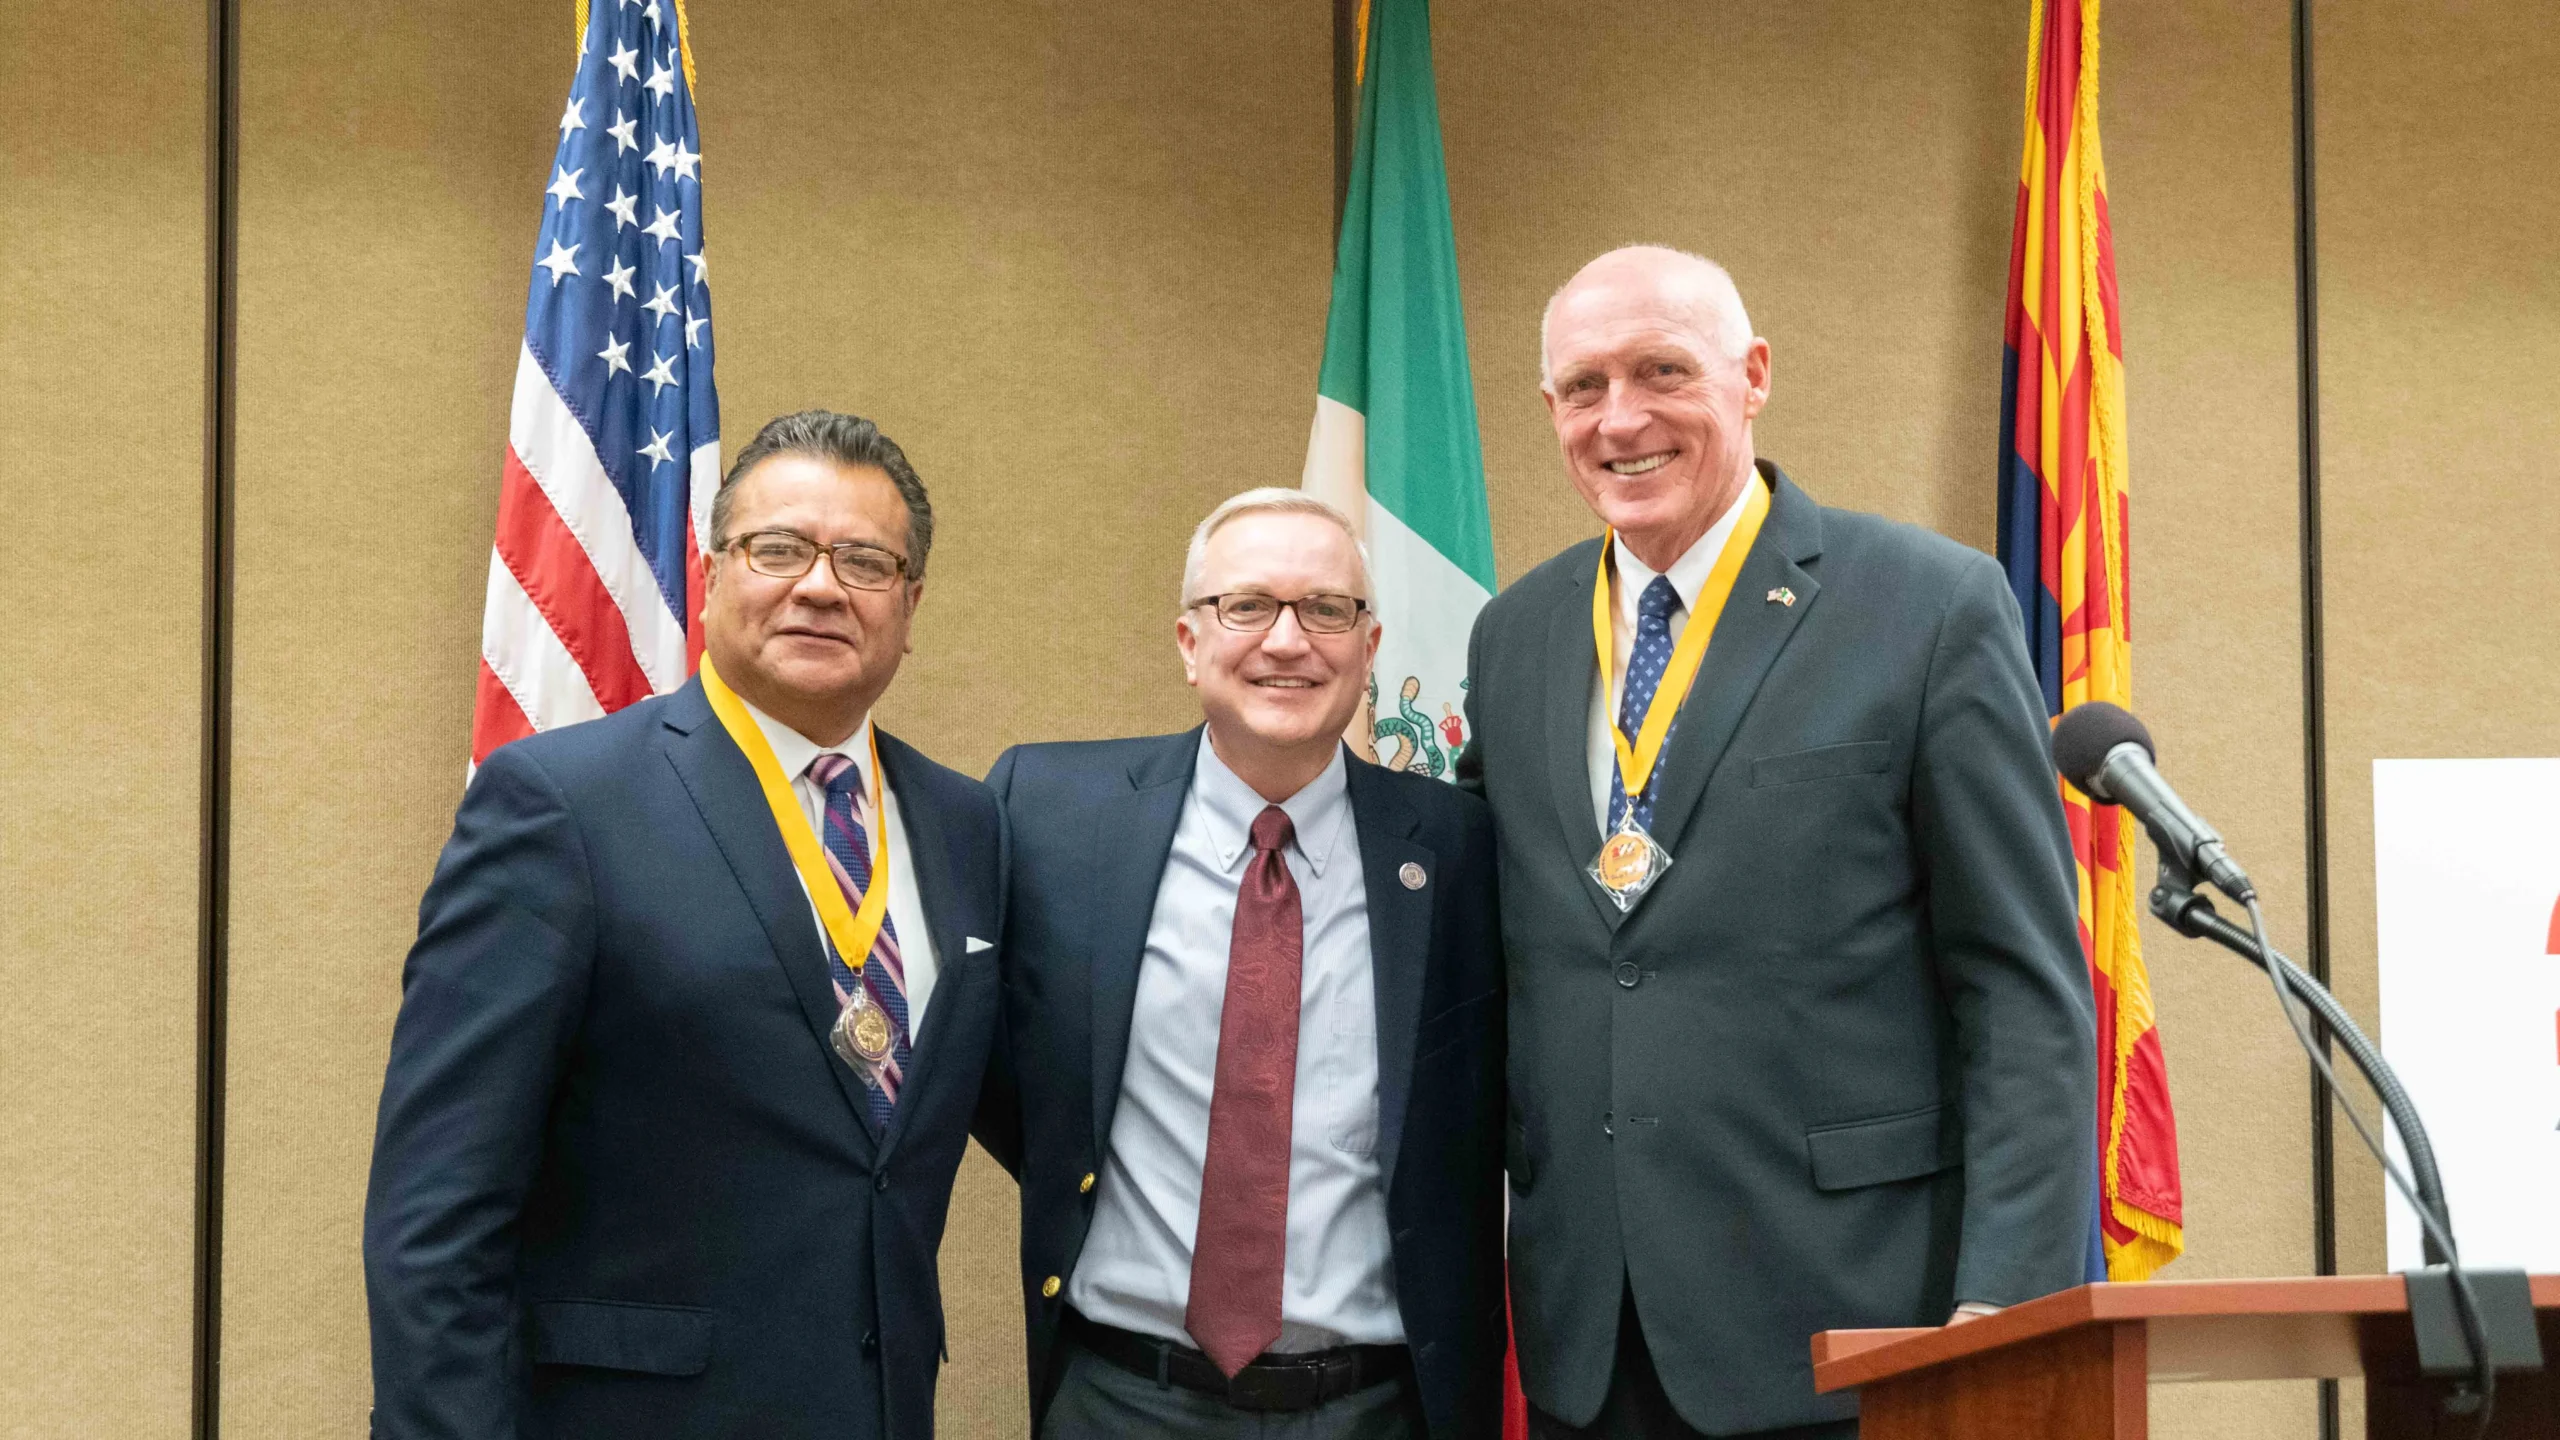 Eastern Arizona College welcomes dignitaries from both sides of the border to commemorate 200 years of U.S.-Mexico diplomatic relations